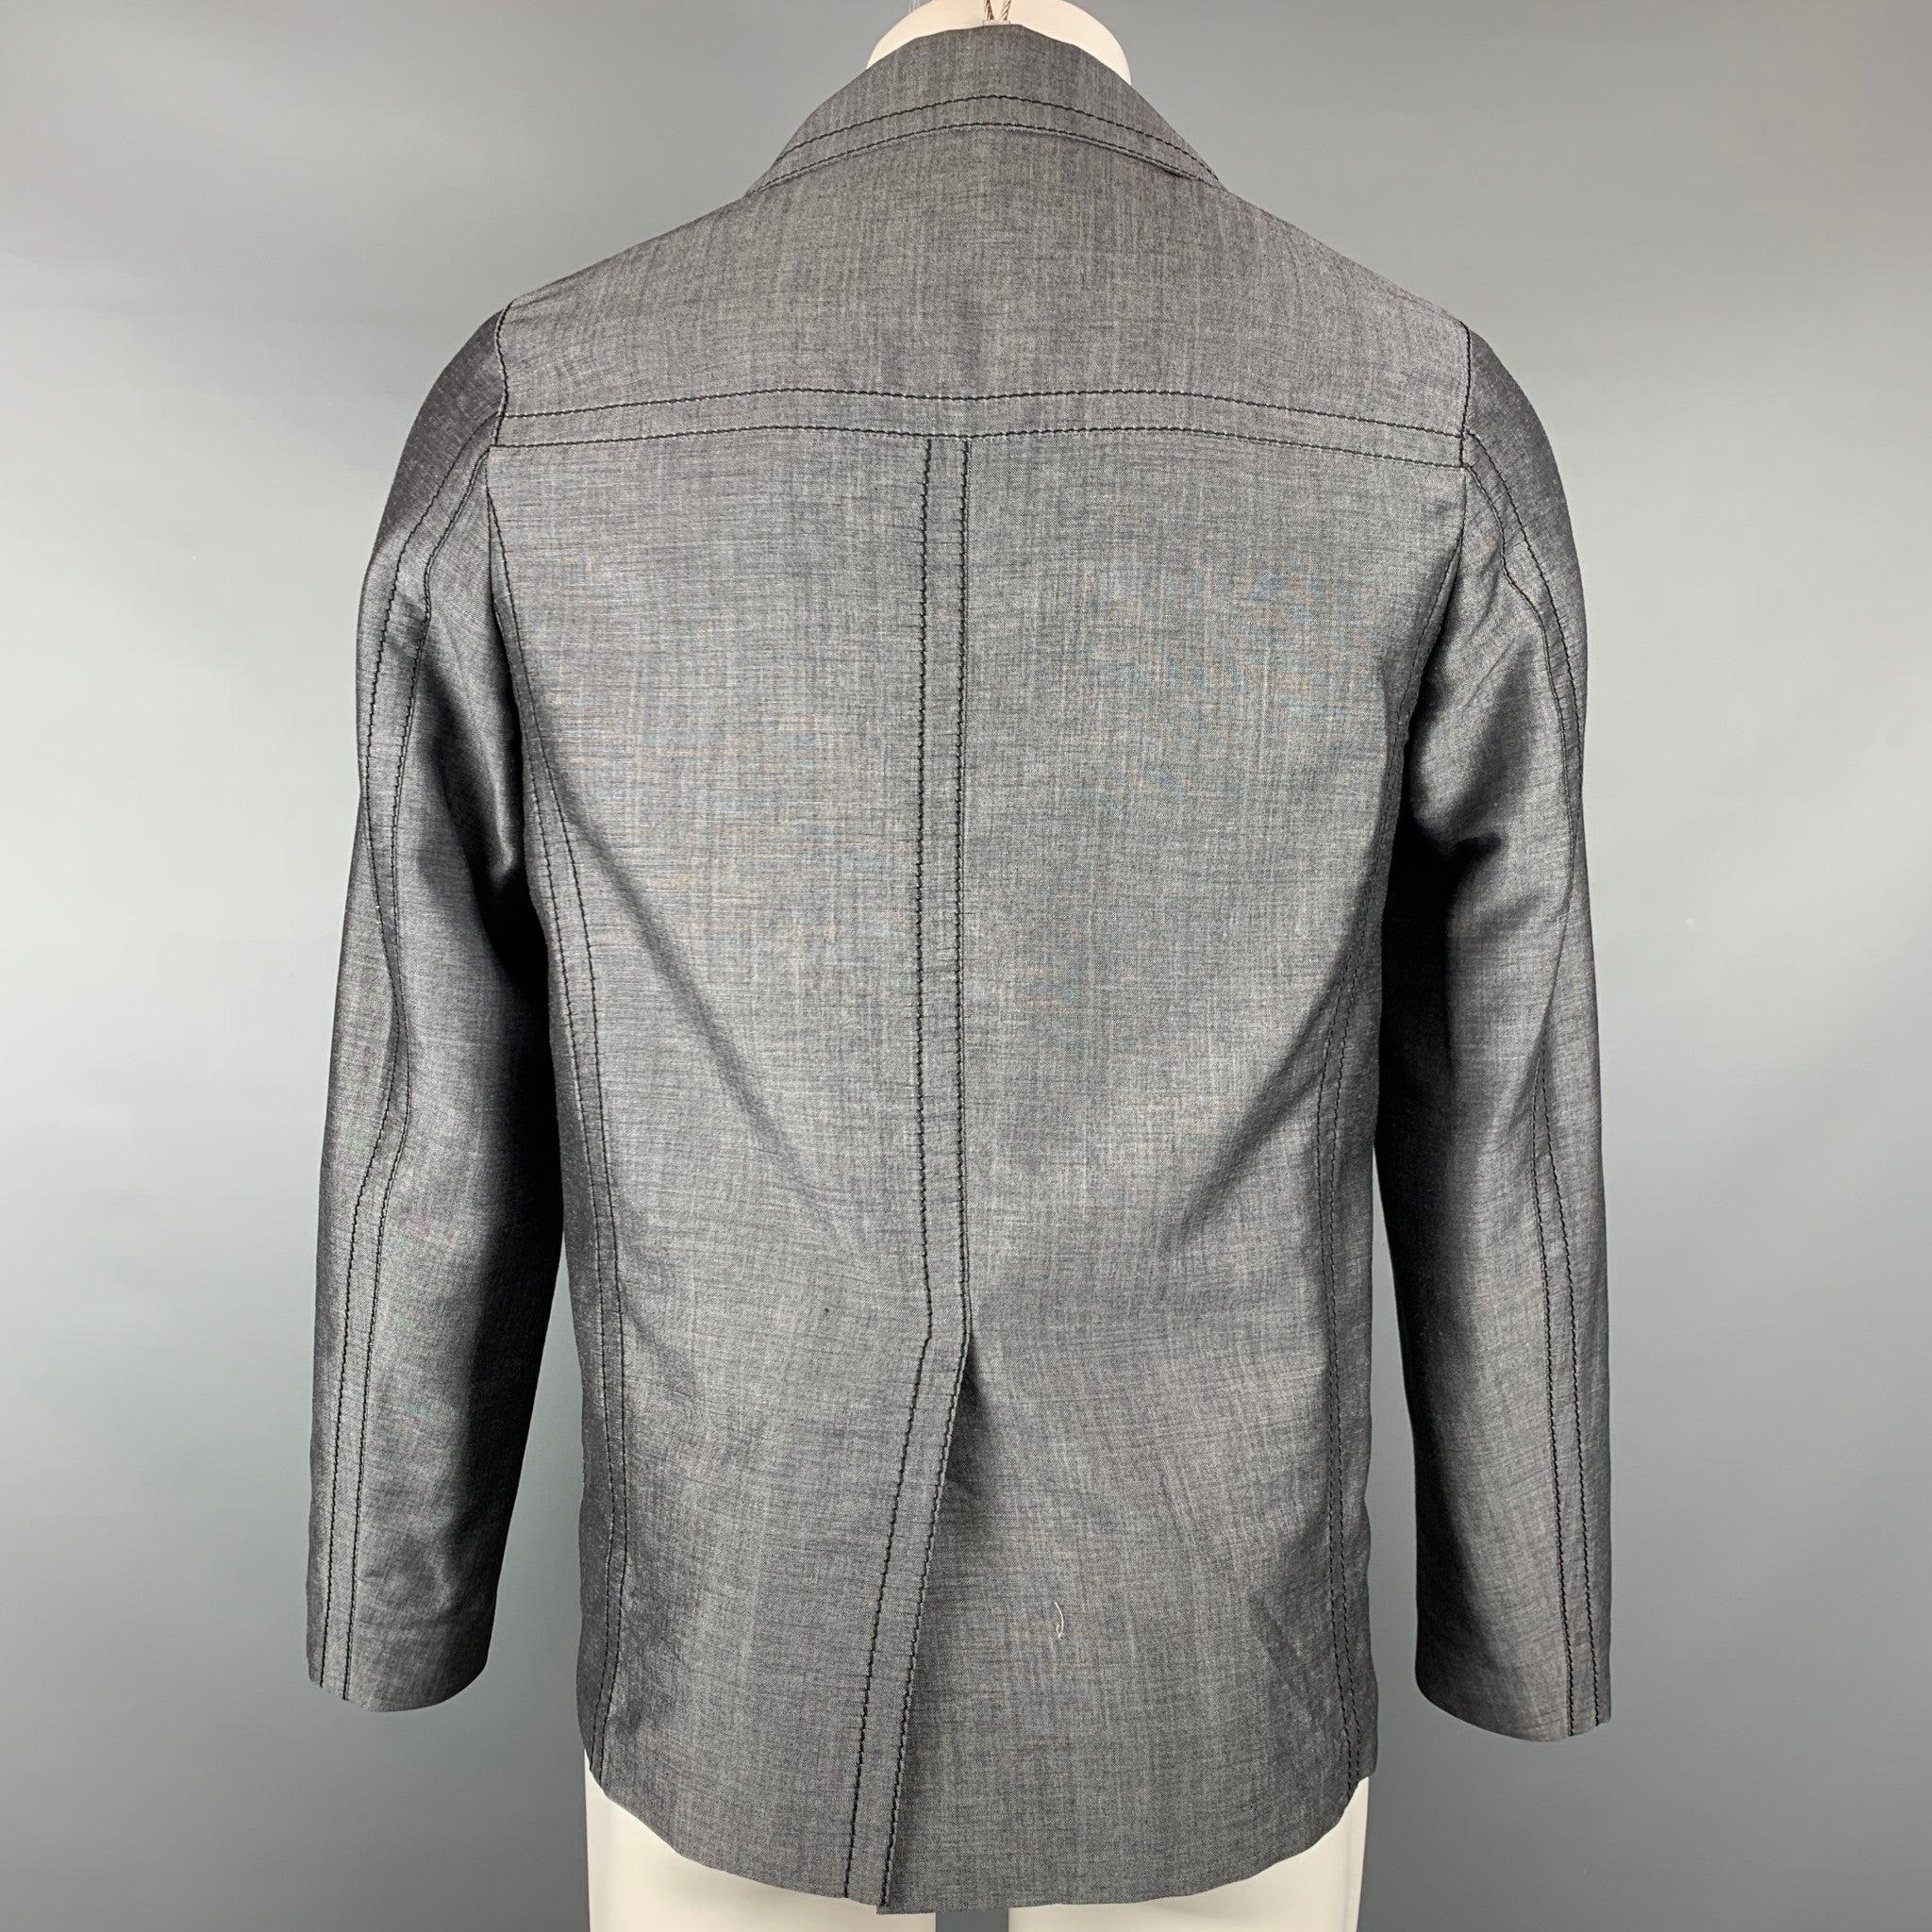 PRADA Size 36 Dark Gray Contrast Stitch Mohair / Wool Jacket In Good Condition For Sale In San Francisco, CA